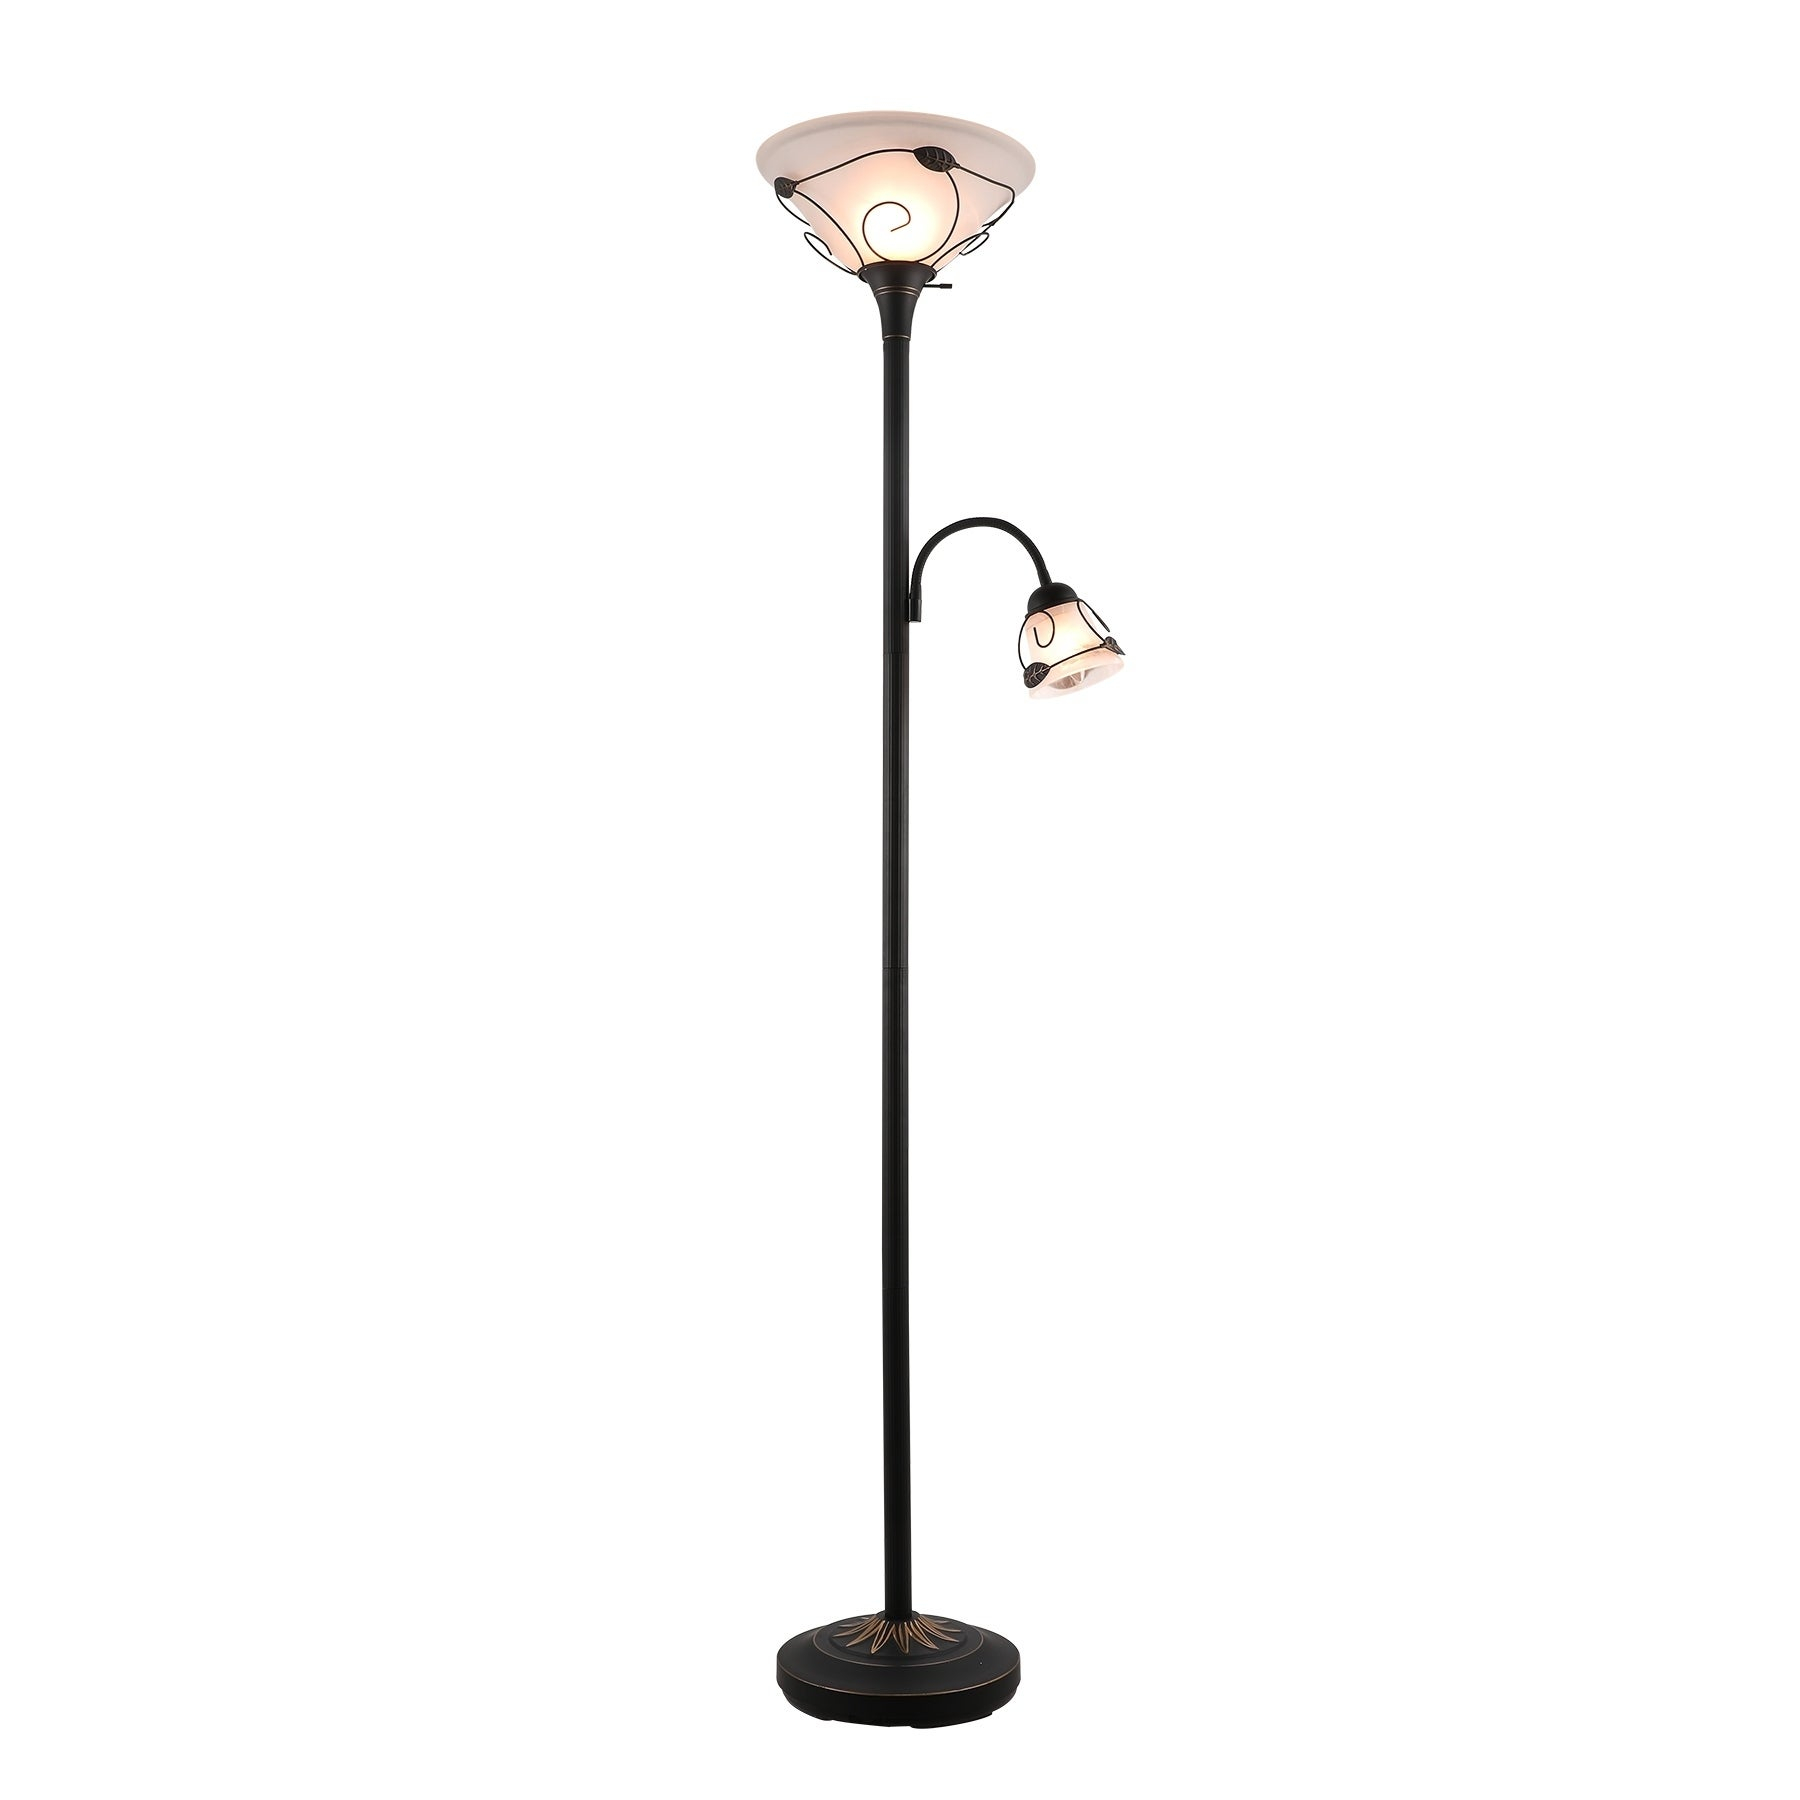 Co Z 71 Inch 3 Way Torchiere Floor Lamp With Adjustable Side Reading Light pertaining to size 1800 X 1800